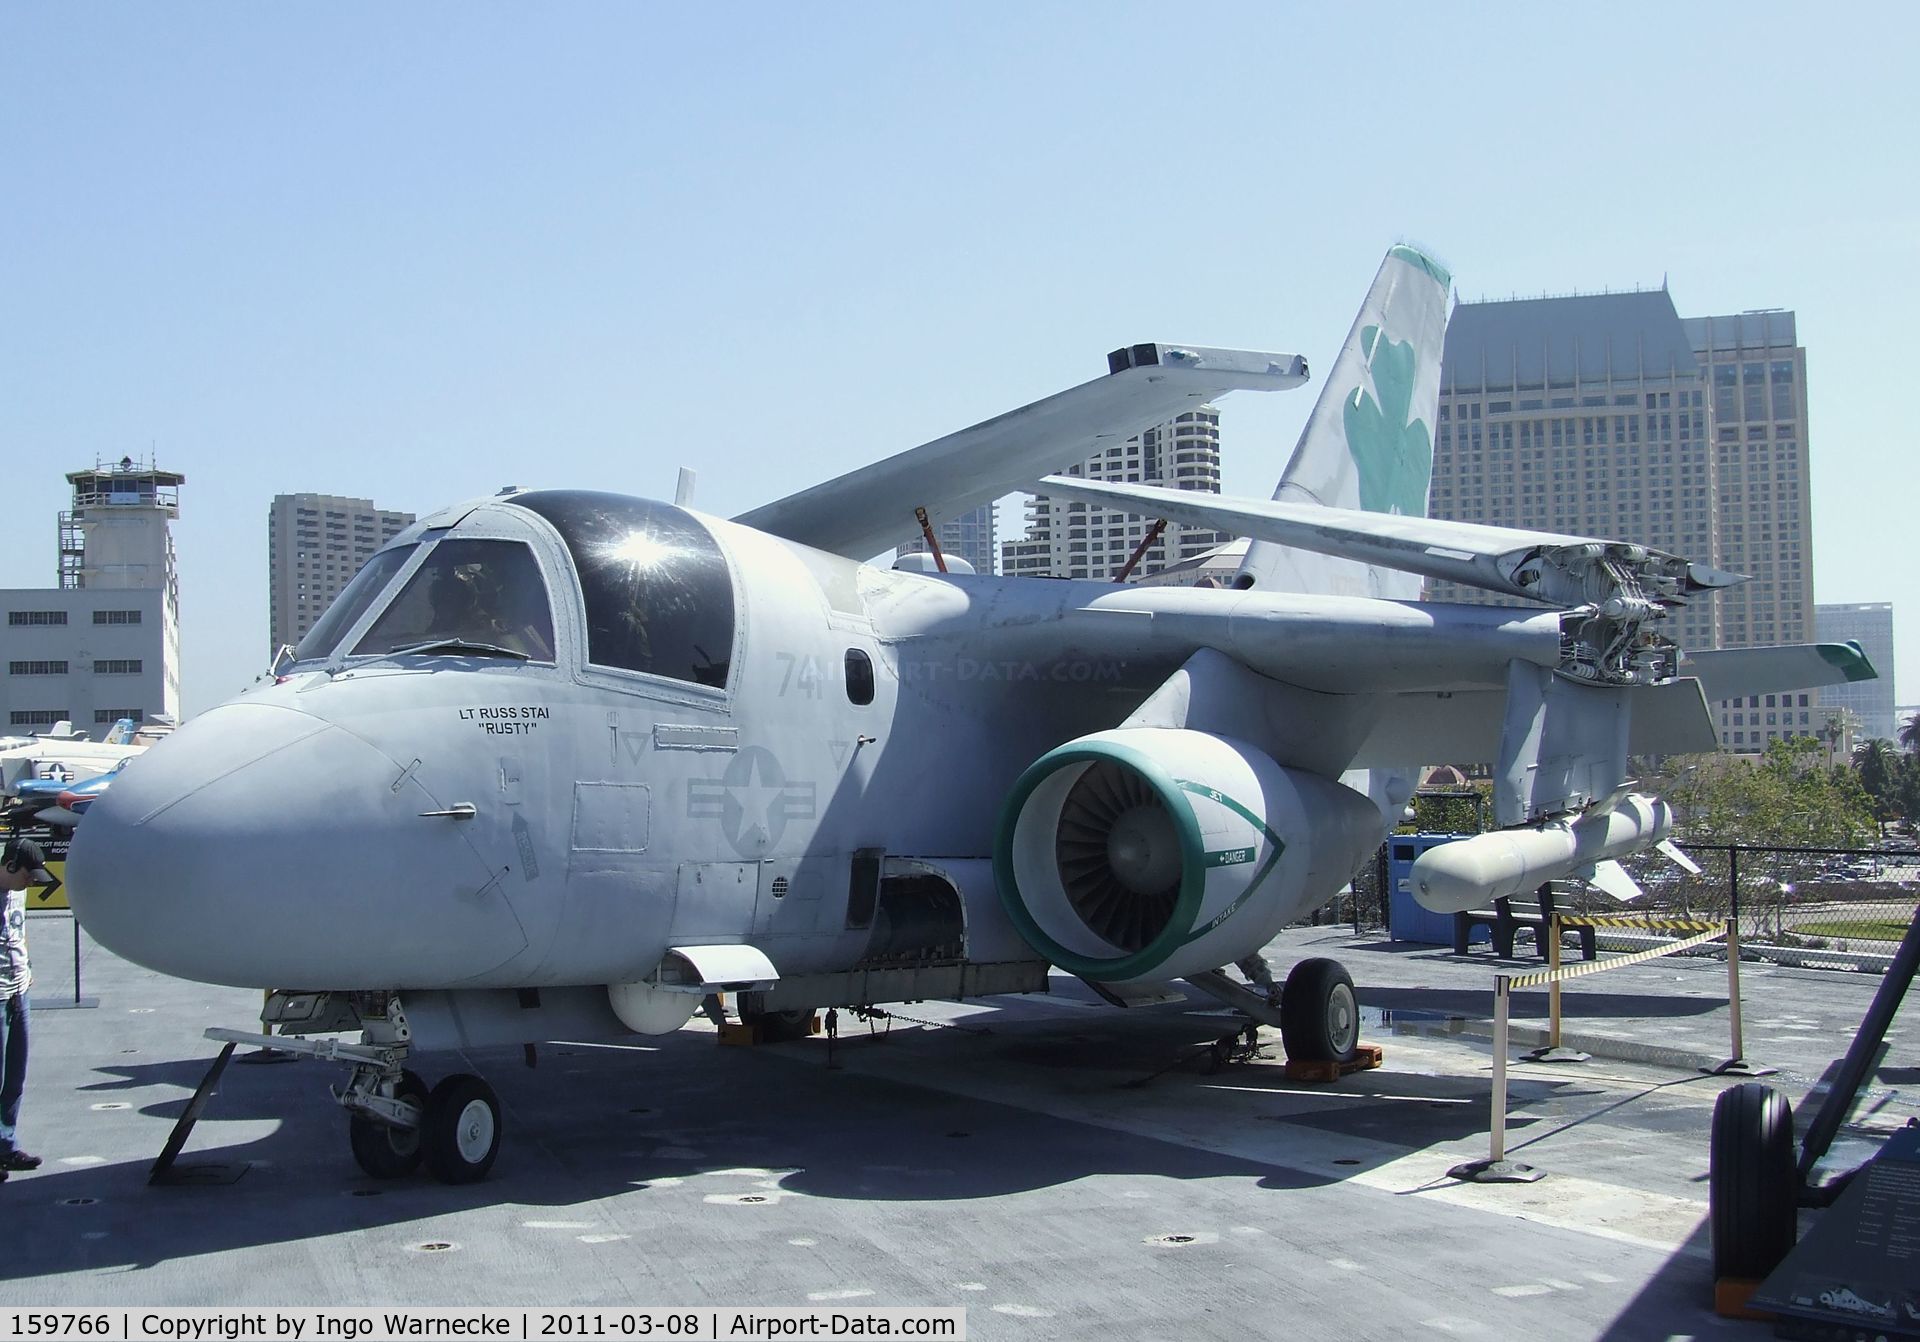 159766, Lockheed S-3A Viking C/N 394A-1095, Lockheed S-3A Viking on the flight deck of the USS Midway Museum, San Diego CA